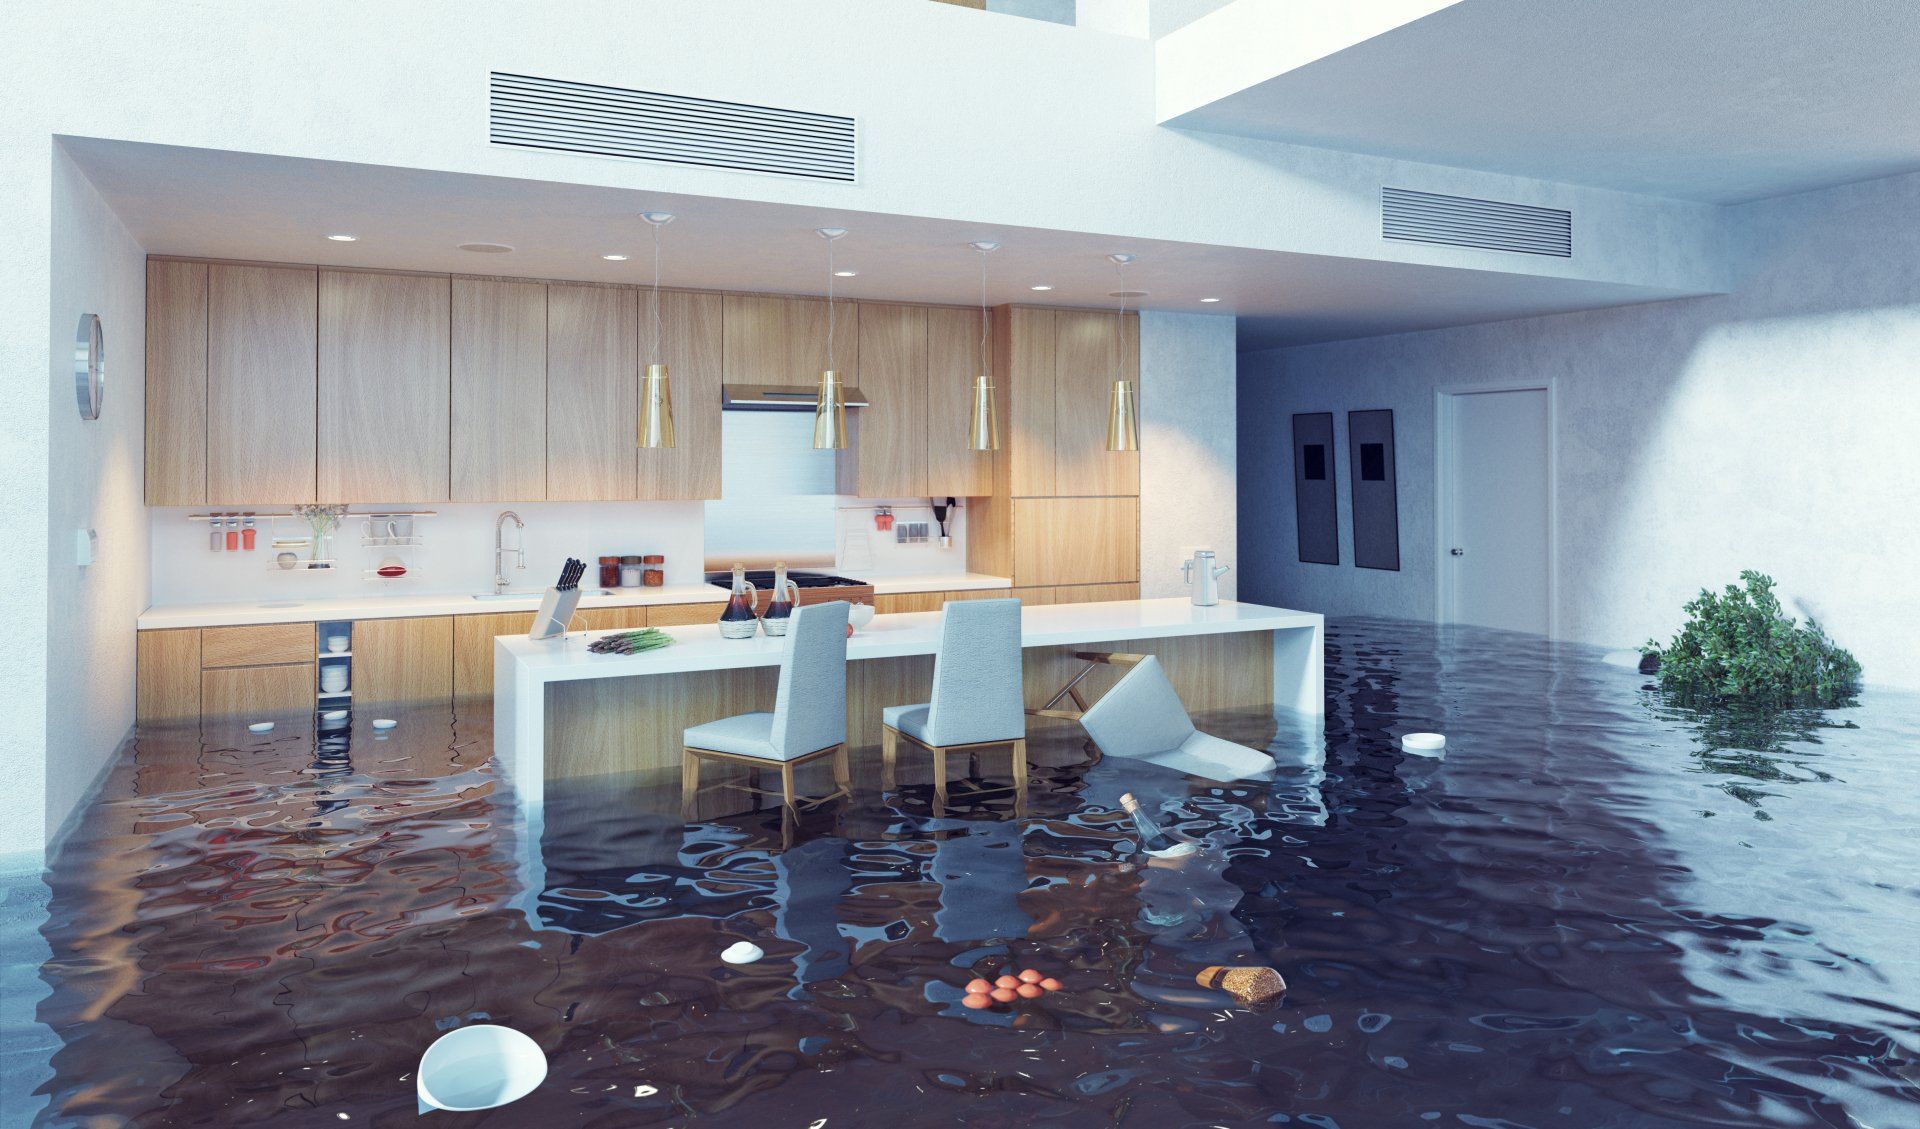 A home in Largo, FL that could use our flood insurance services